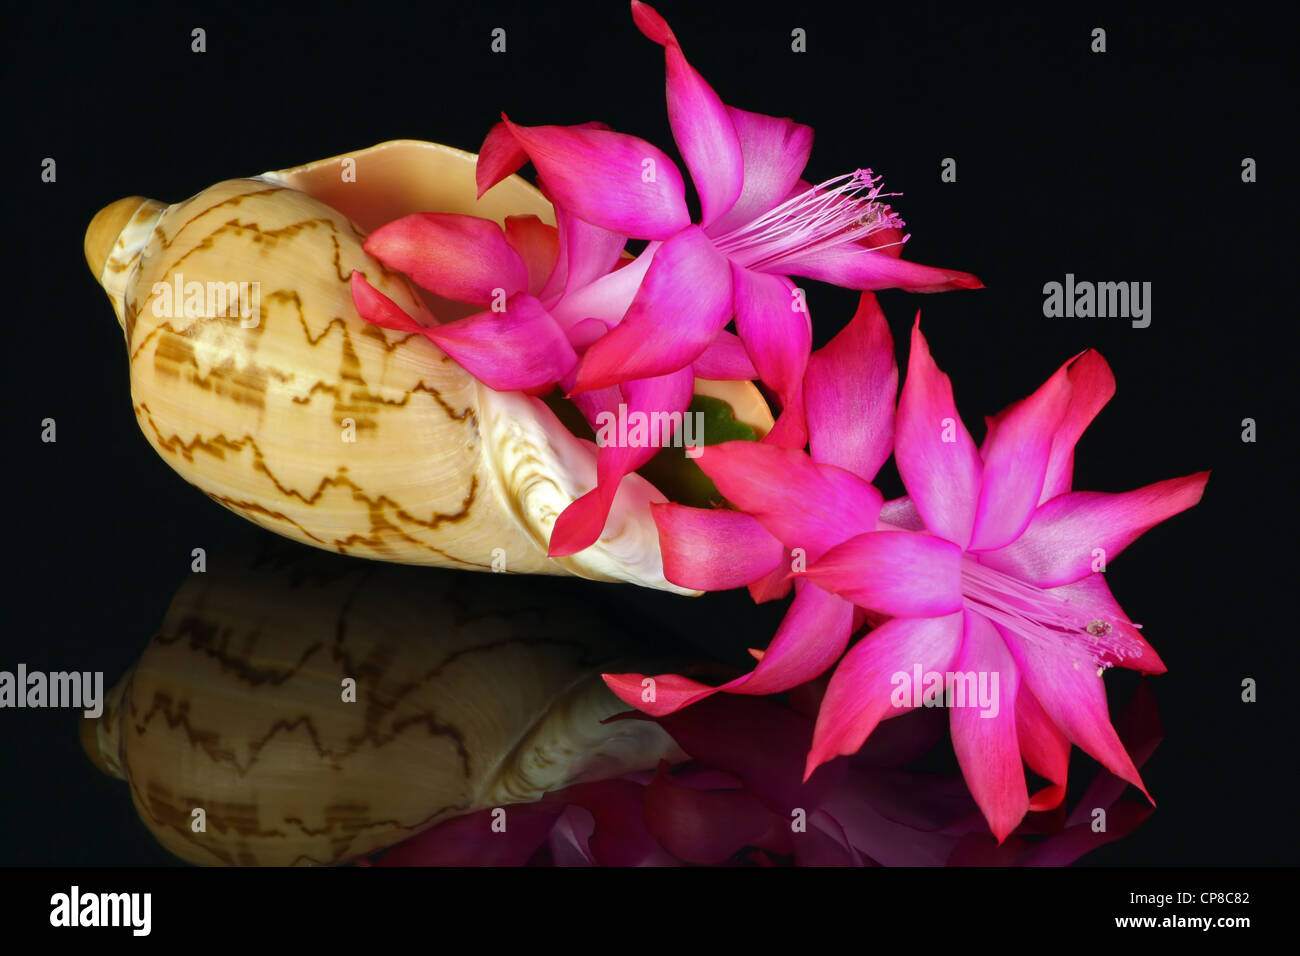 Bowl of a marine cockleshell with a fine pink shining flower peyote (nopal, torch thistle, cereus, cholla) on black mirror. Stock Photo